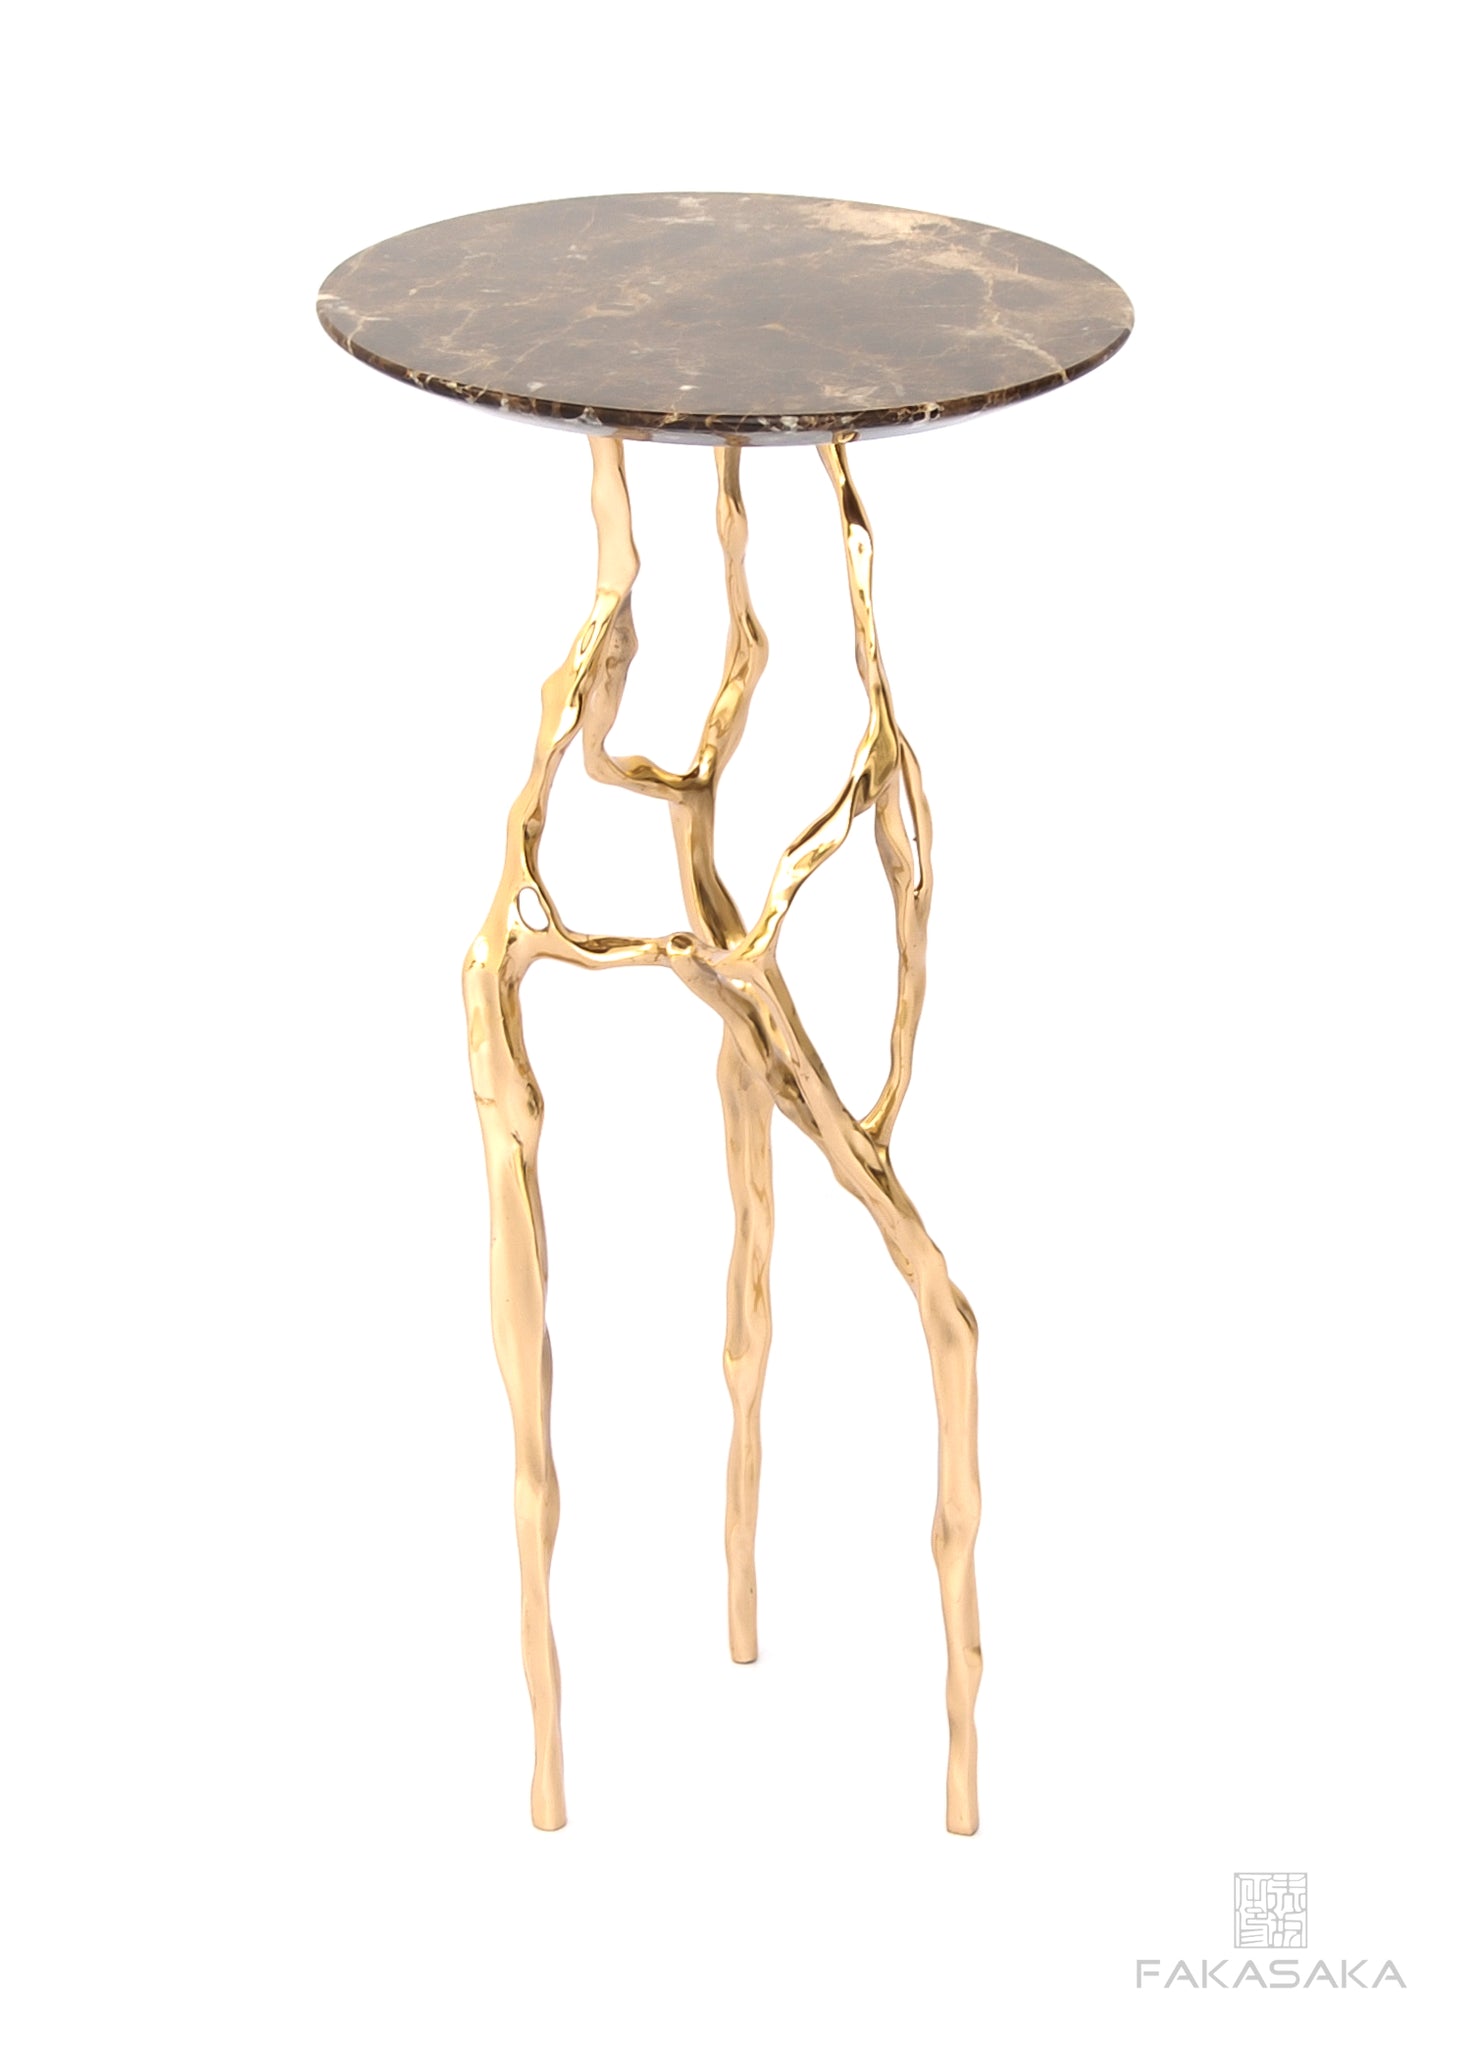 SID DRINK TABLE<br><br>MARRON IMPERIAL MARBLE<br>POLISHED BRONZE